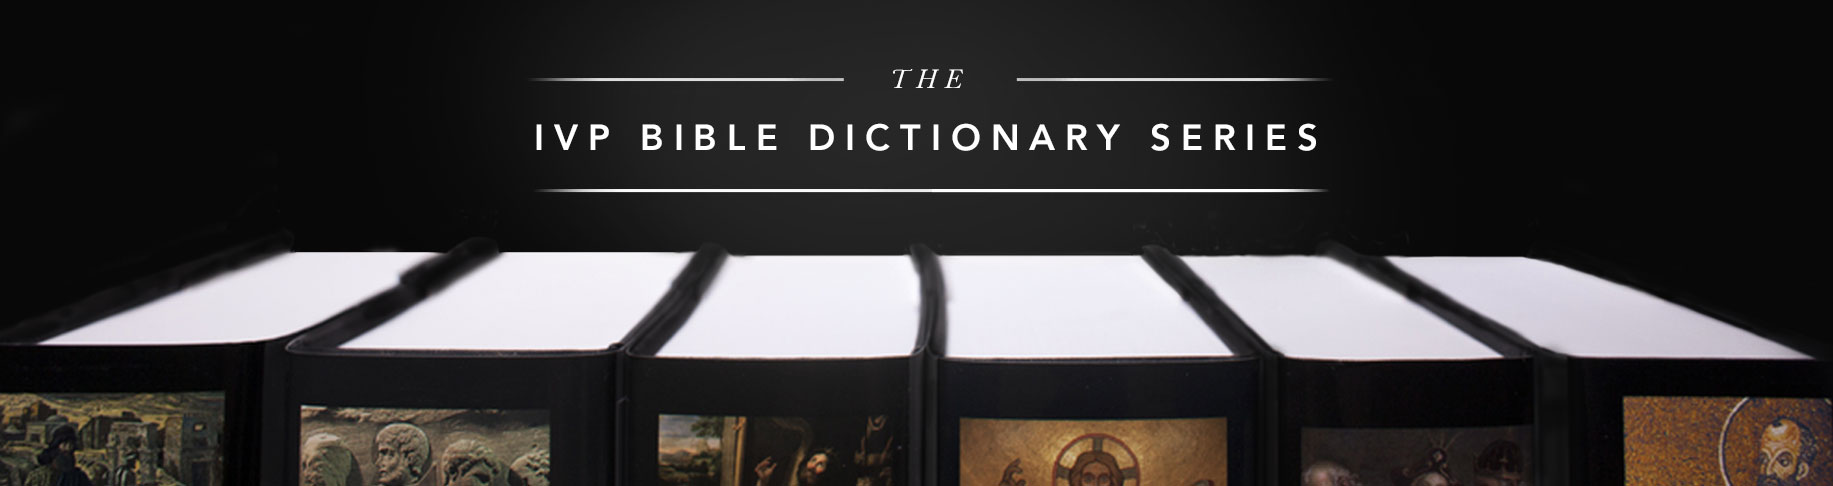 The IVP Bible Dictionary Series